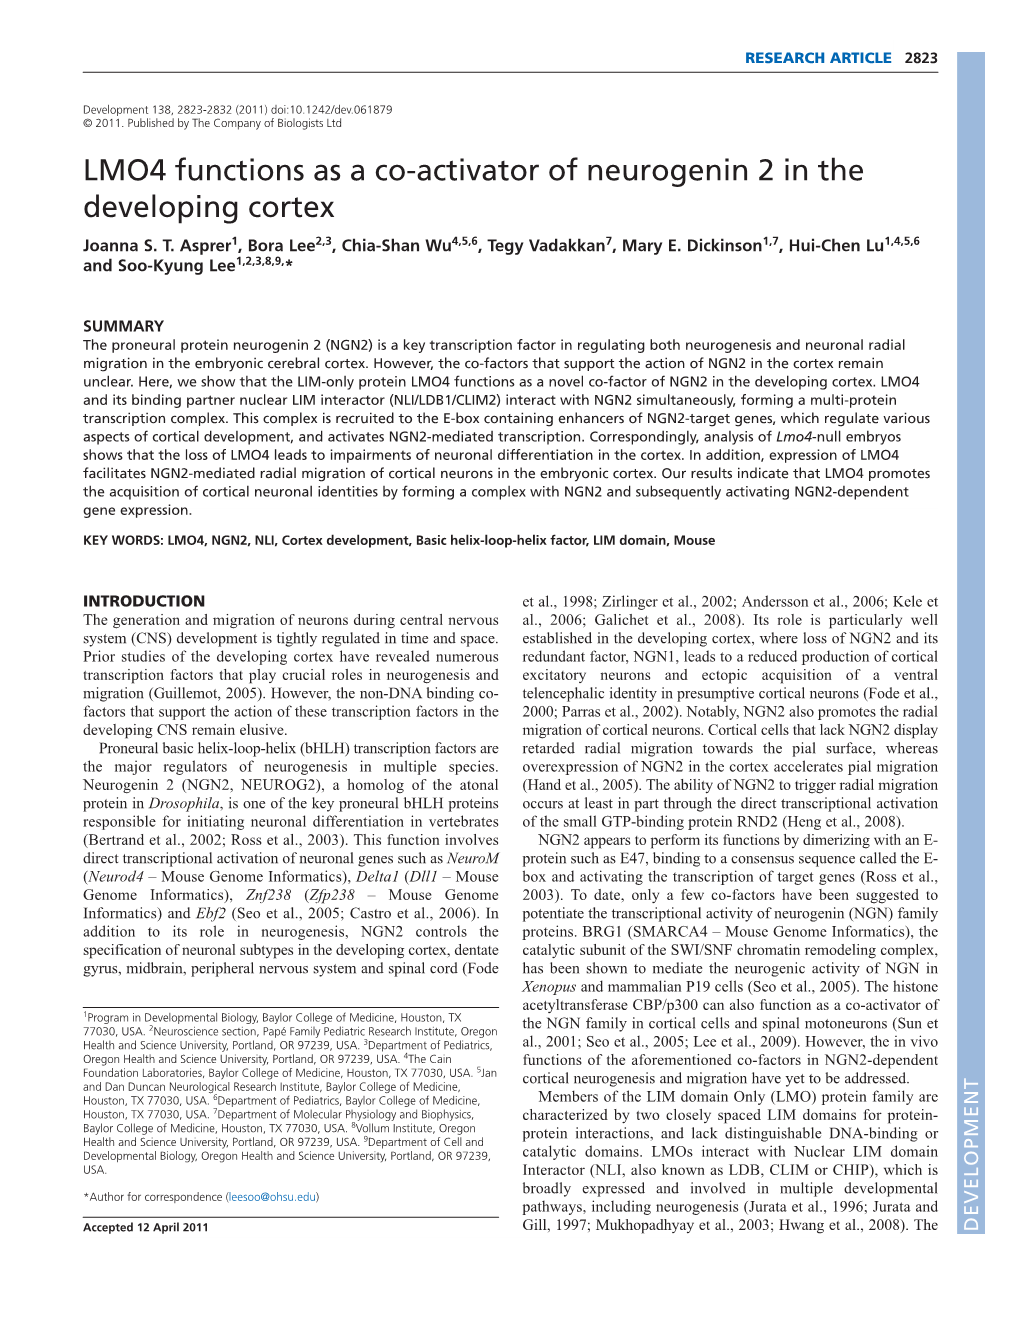 LMO4 Functions As a Co-Activator of Neurogenin 2 in the Developing Cortex Joanna S